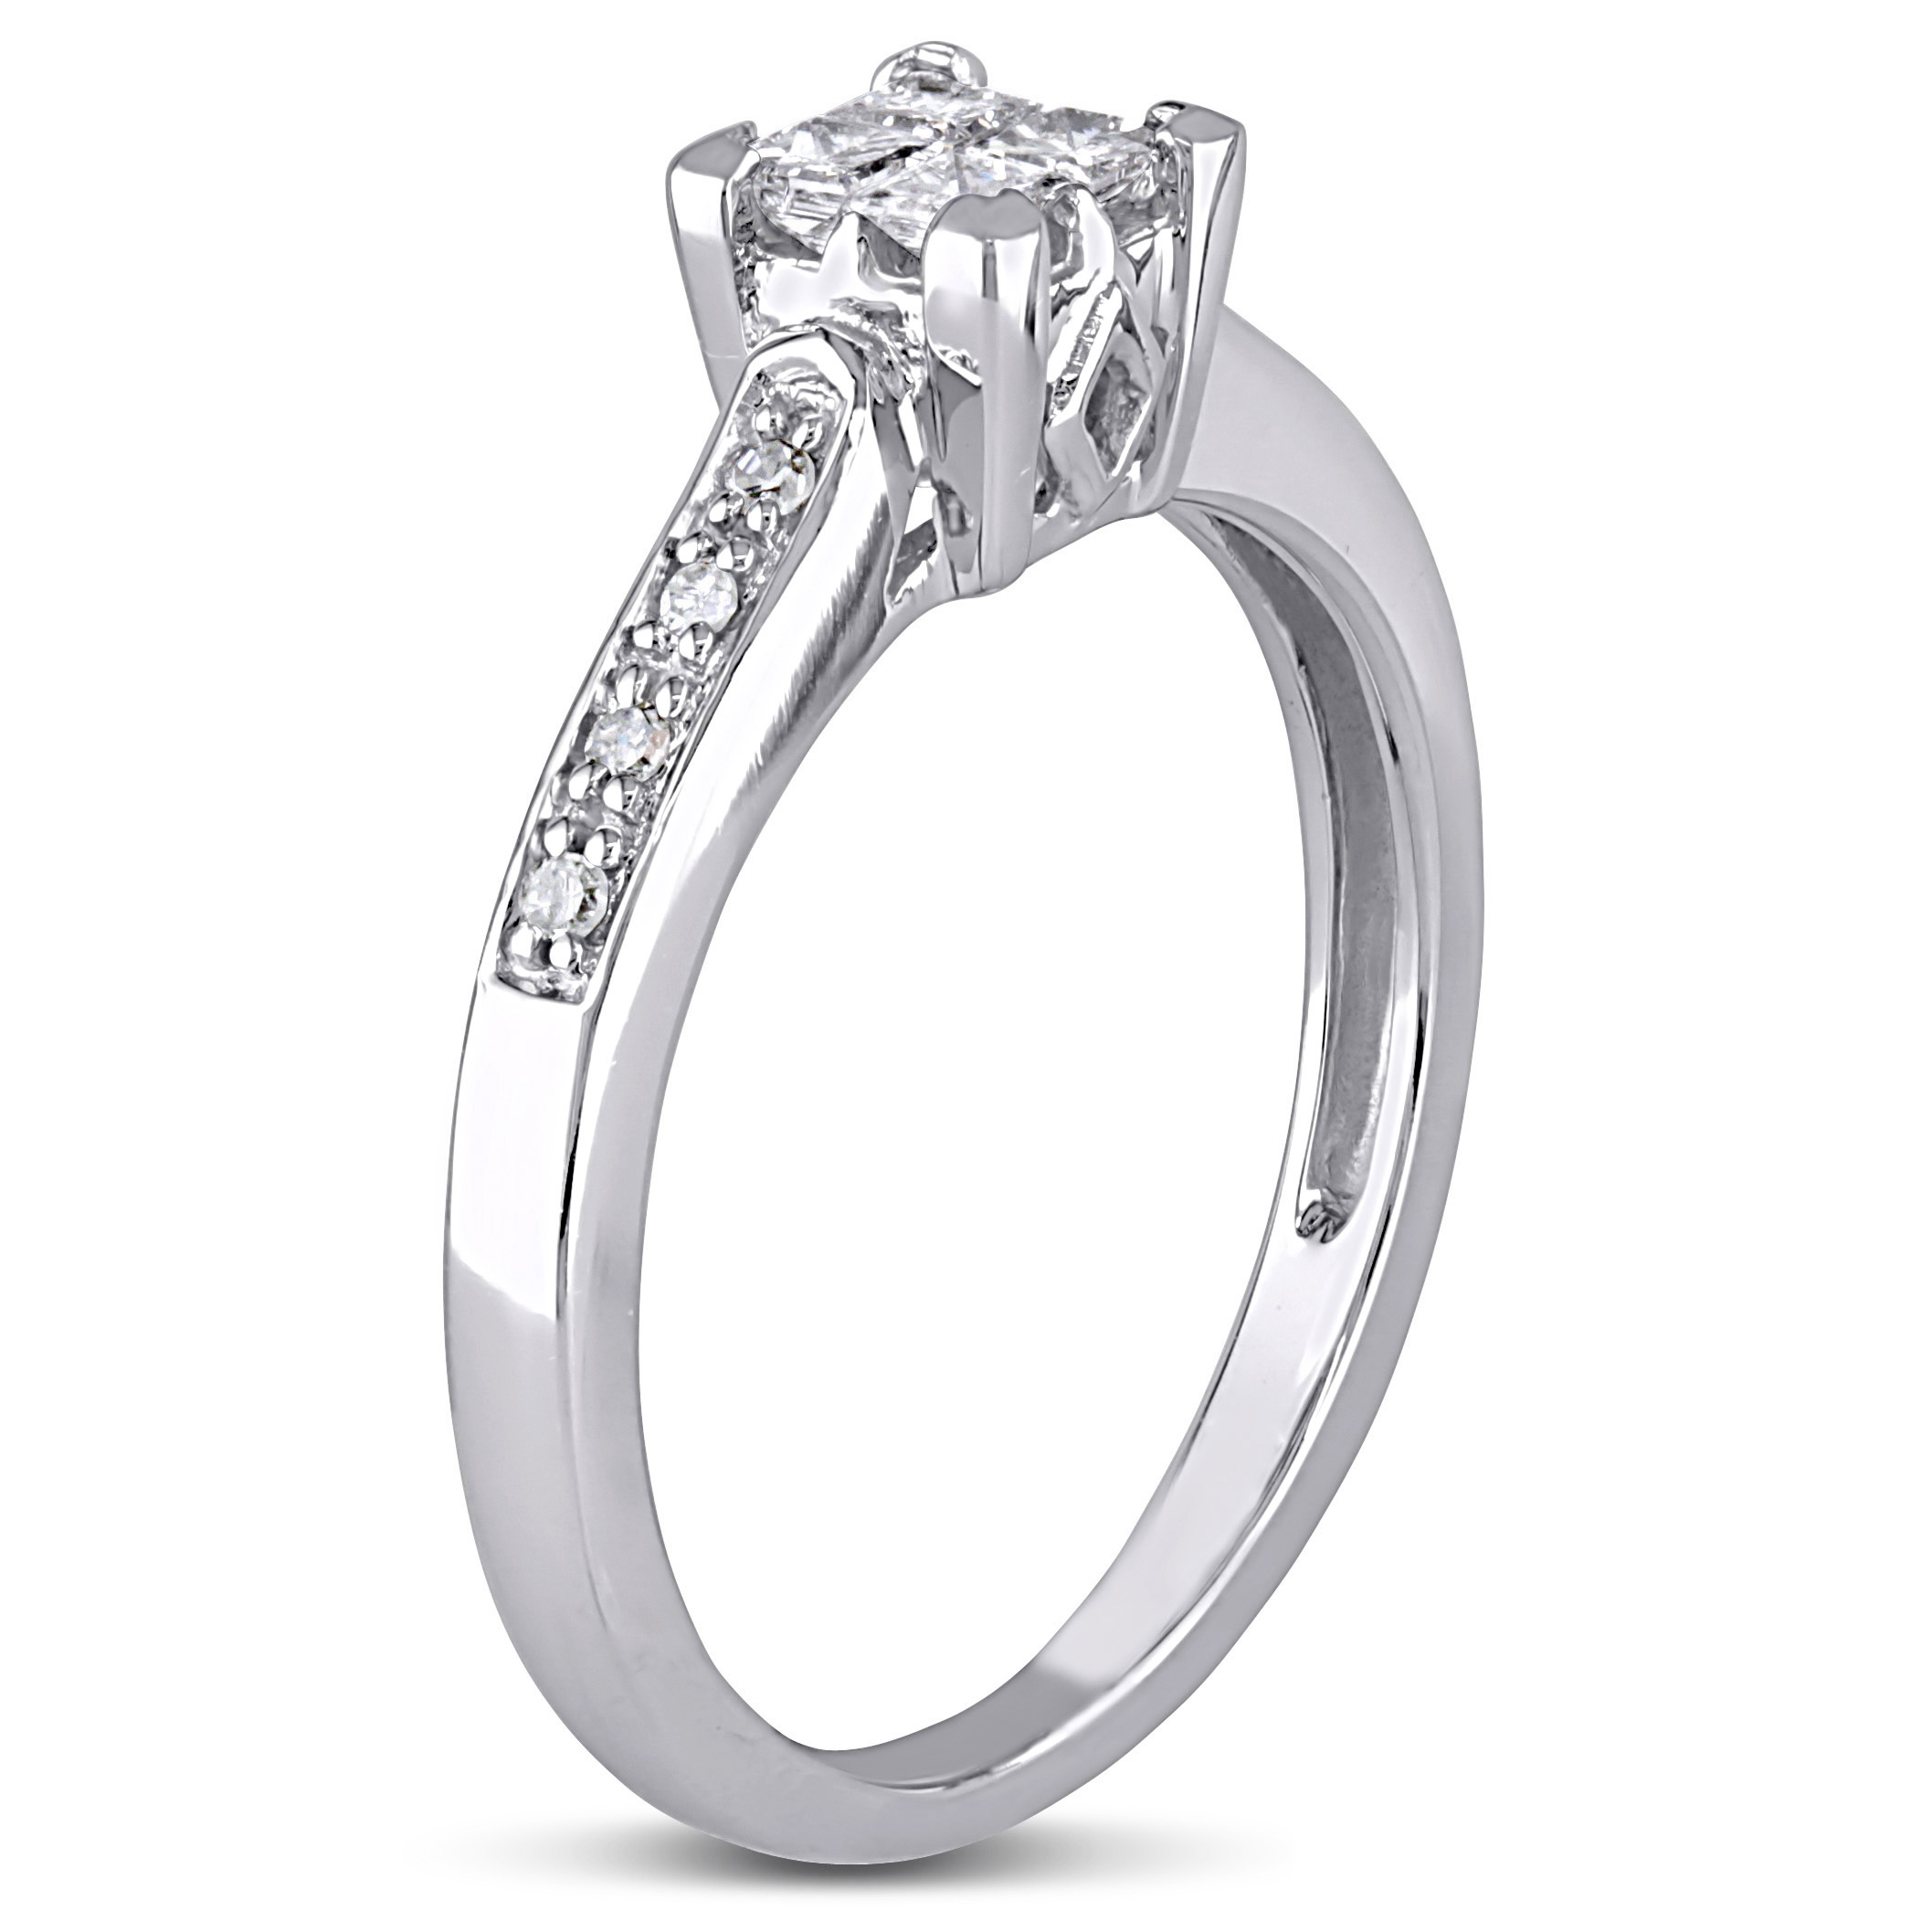 1/4 CT TW Princess Cut Quad and Round Diamond Engagement Ring in 10k White Gold